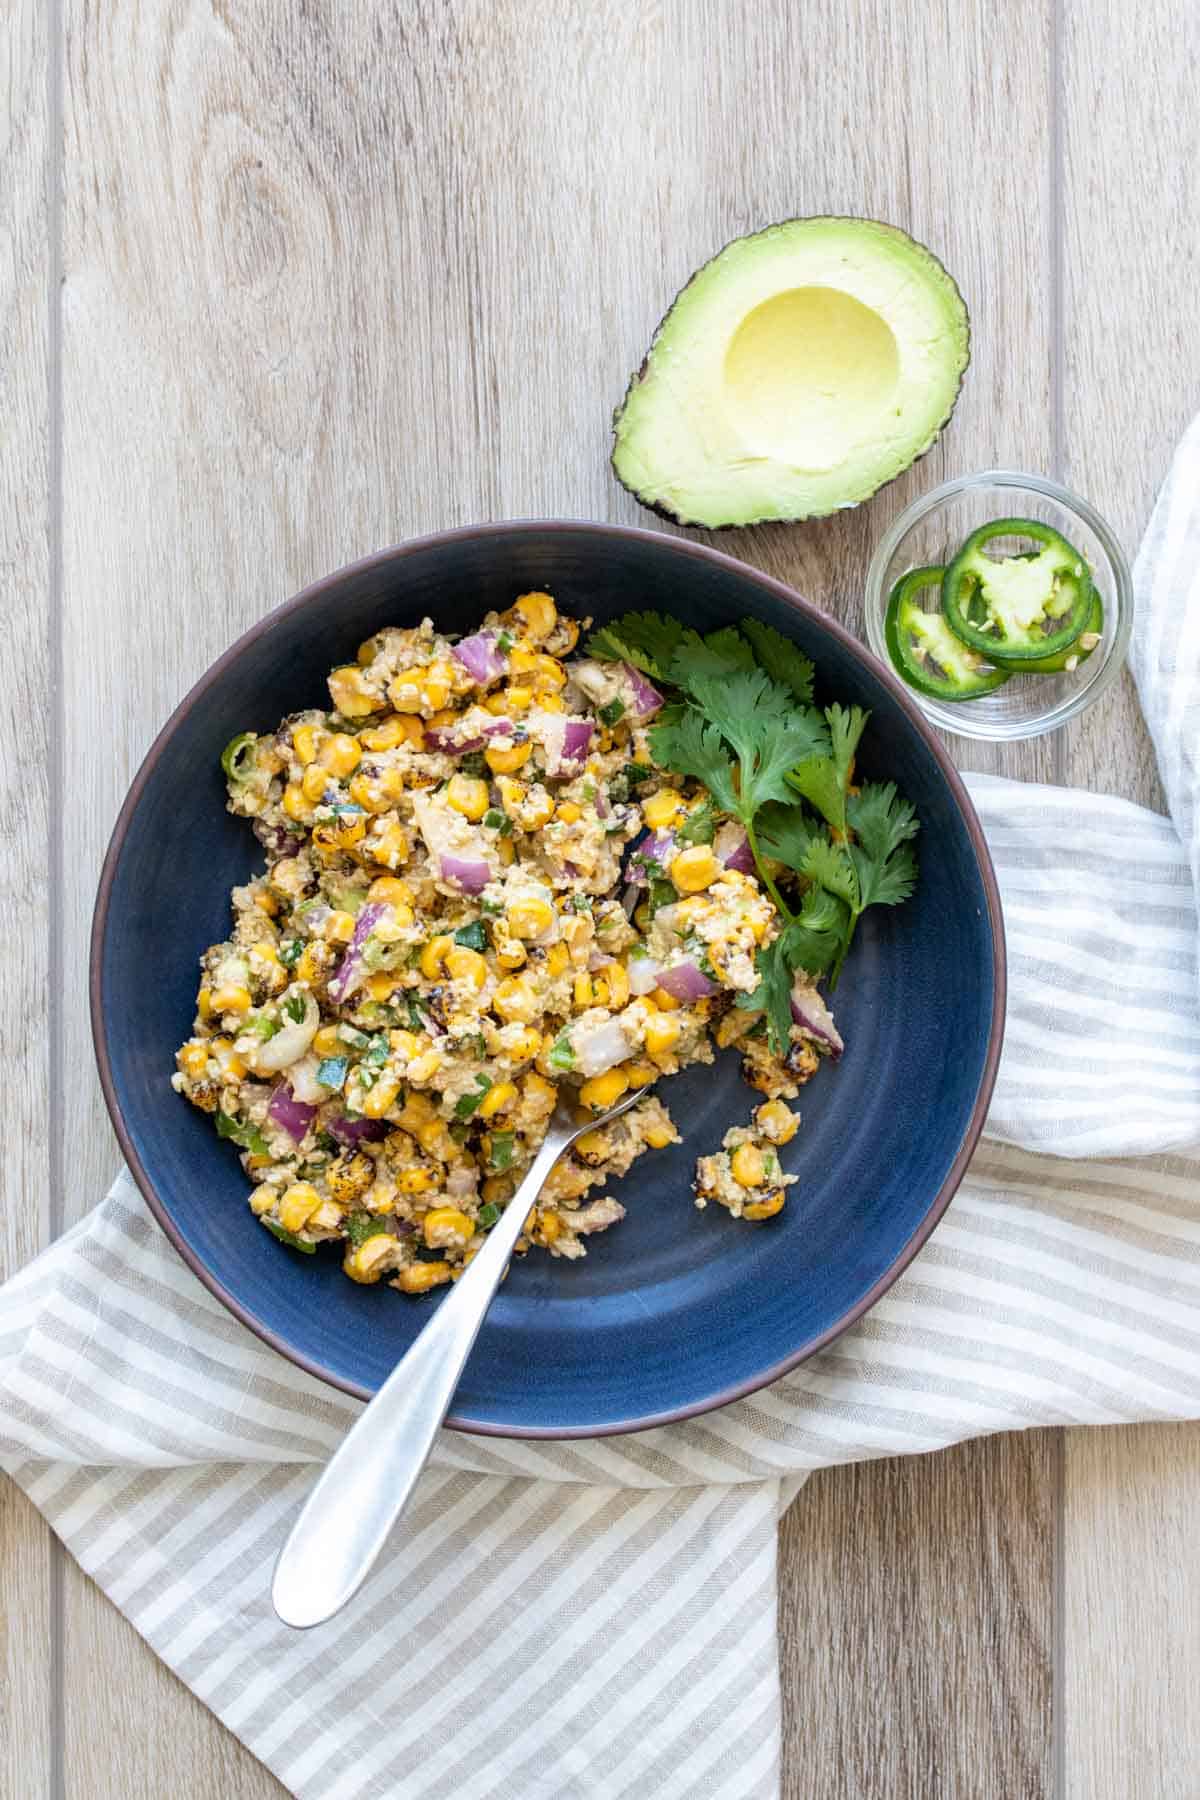 Corn salad with red onion and cilantro in a blue bowl next to avocado and jalapenos